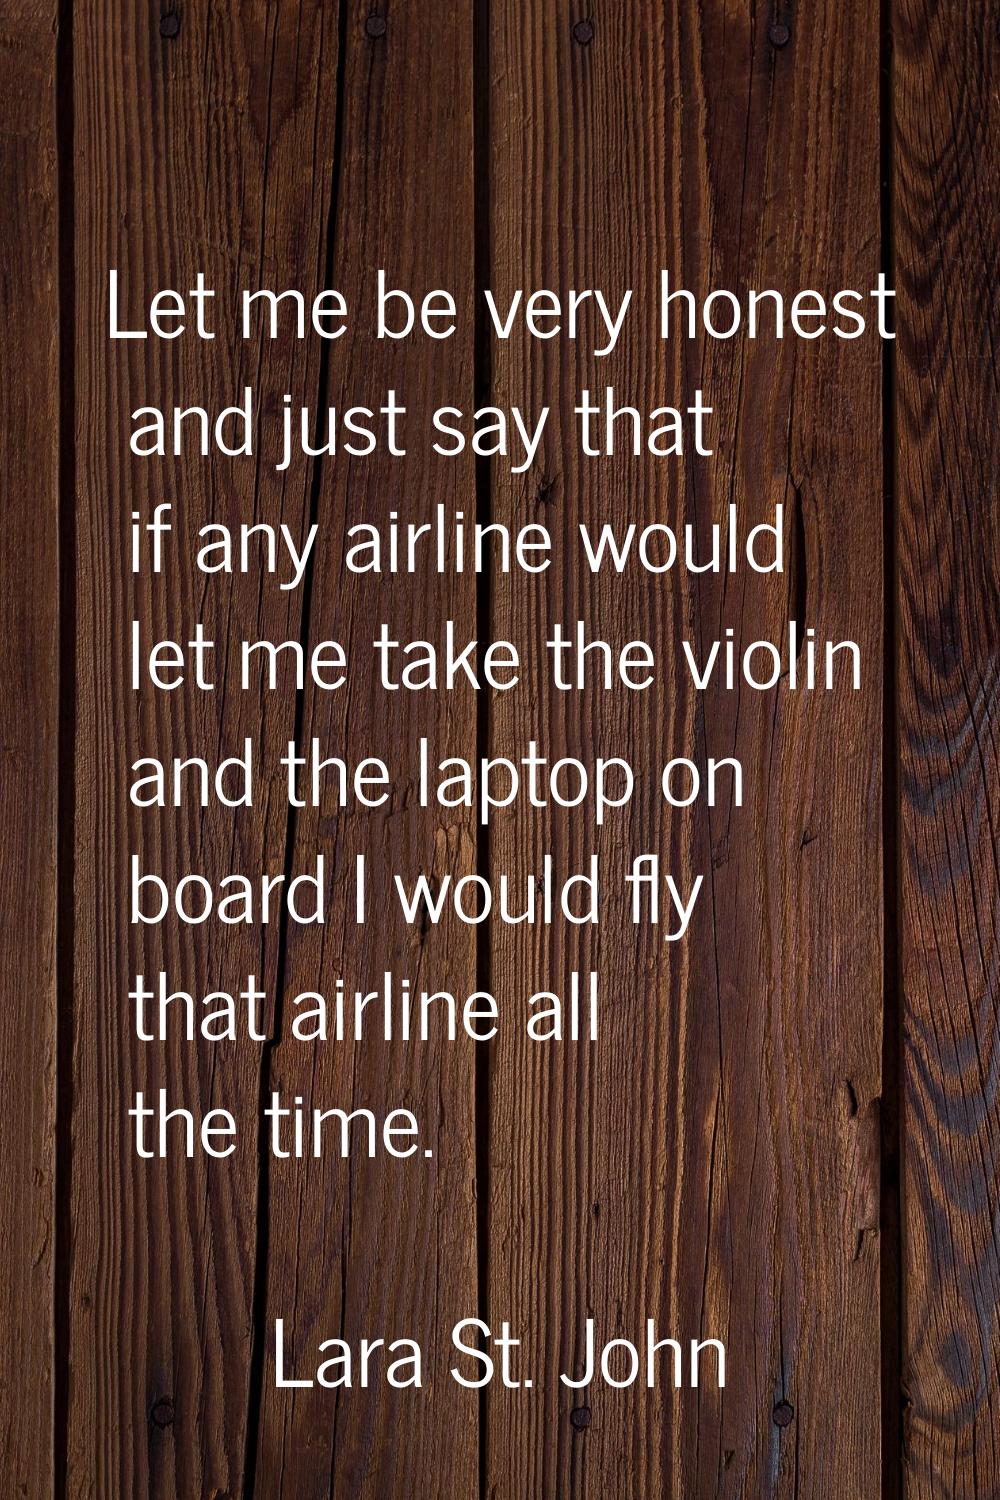 Let me be very honest and just say that if any airline would let me take the violin and the laptop 